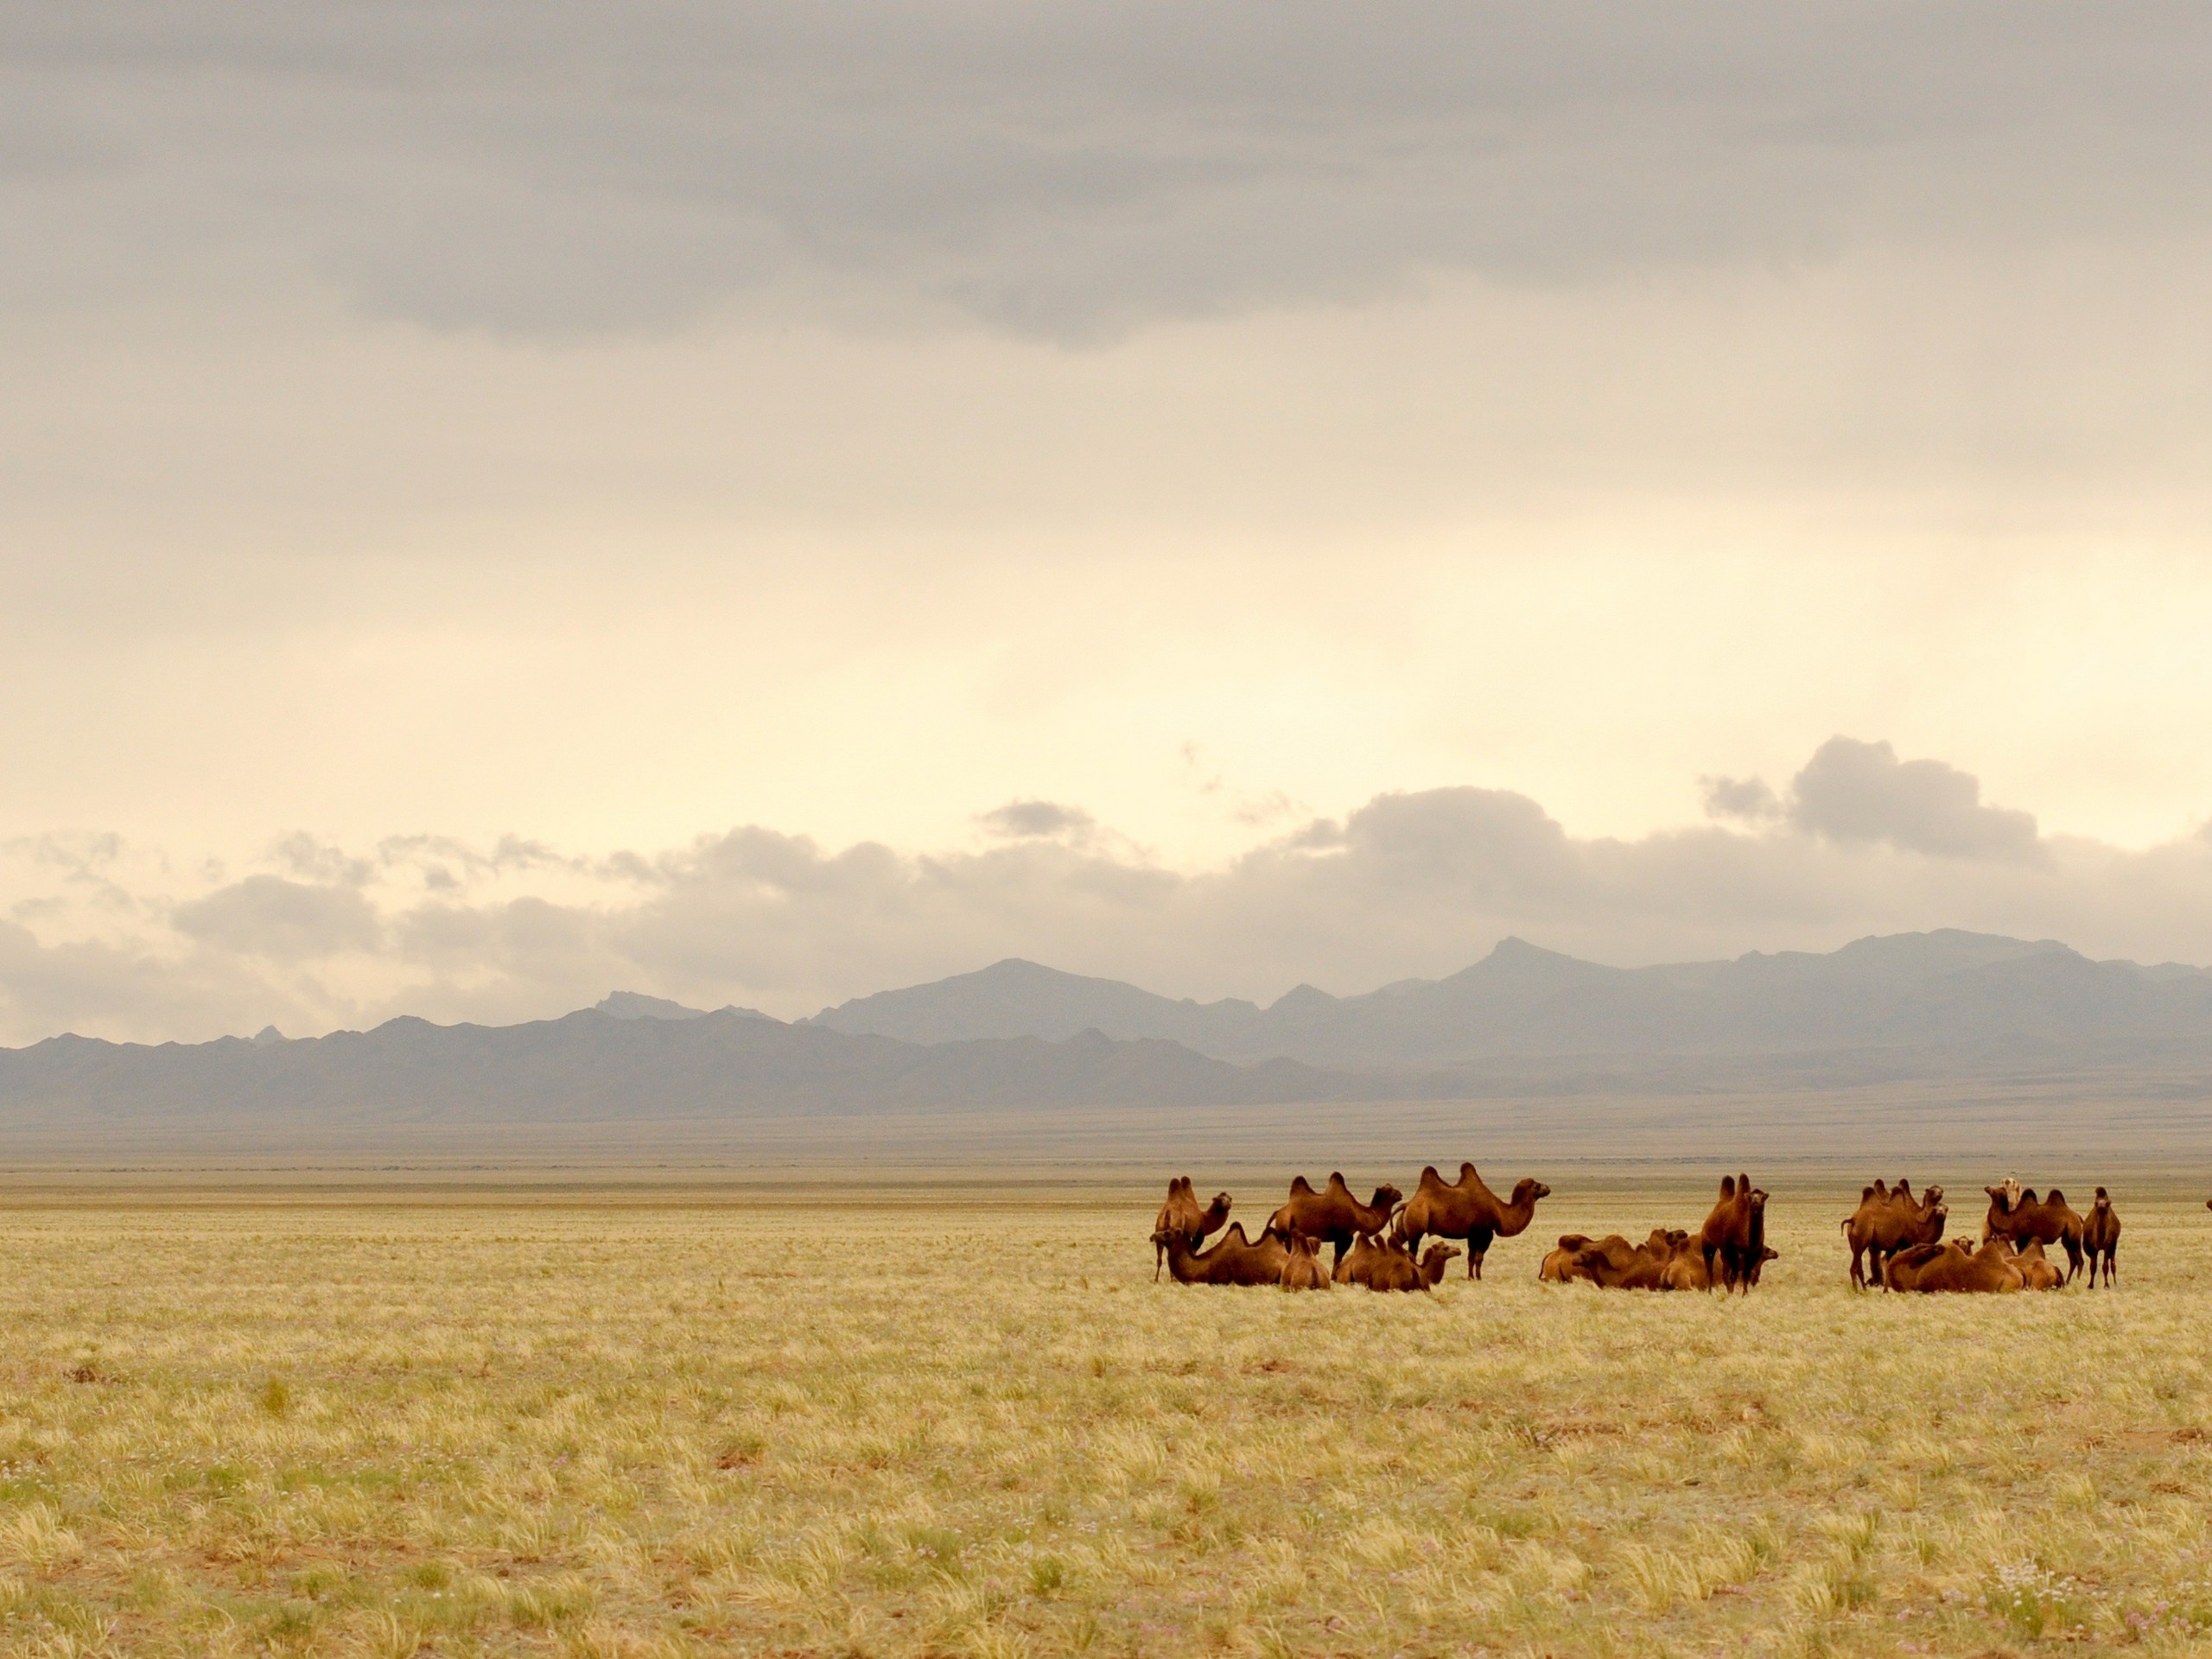 Camels in front of Mongolian Mountains